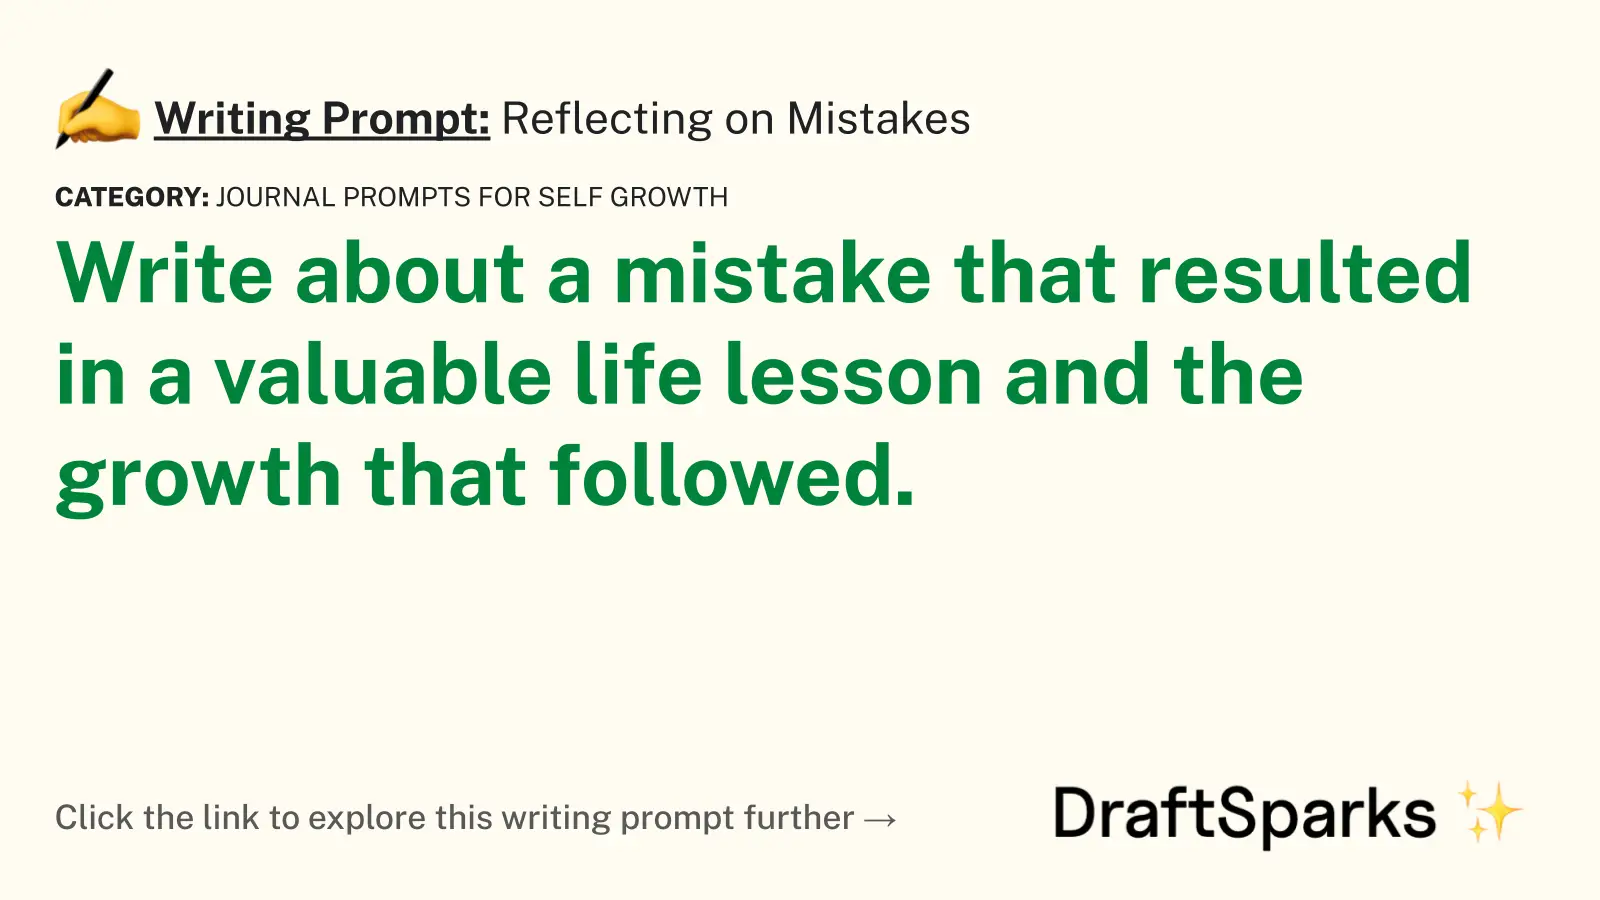 Reflecting on Mistakes